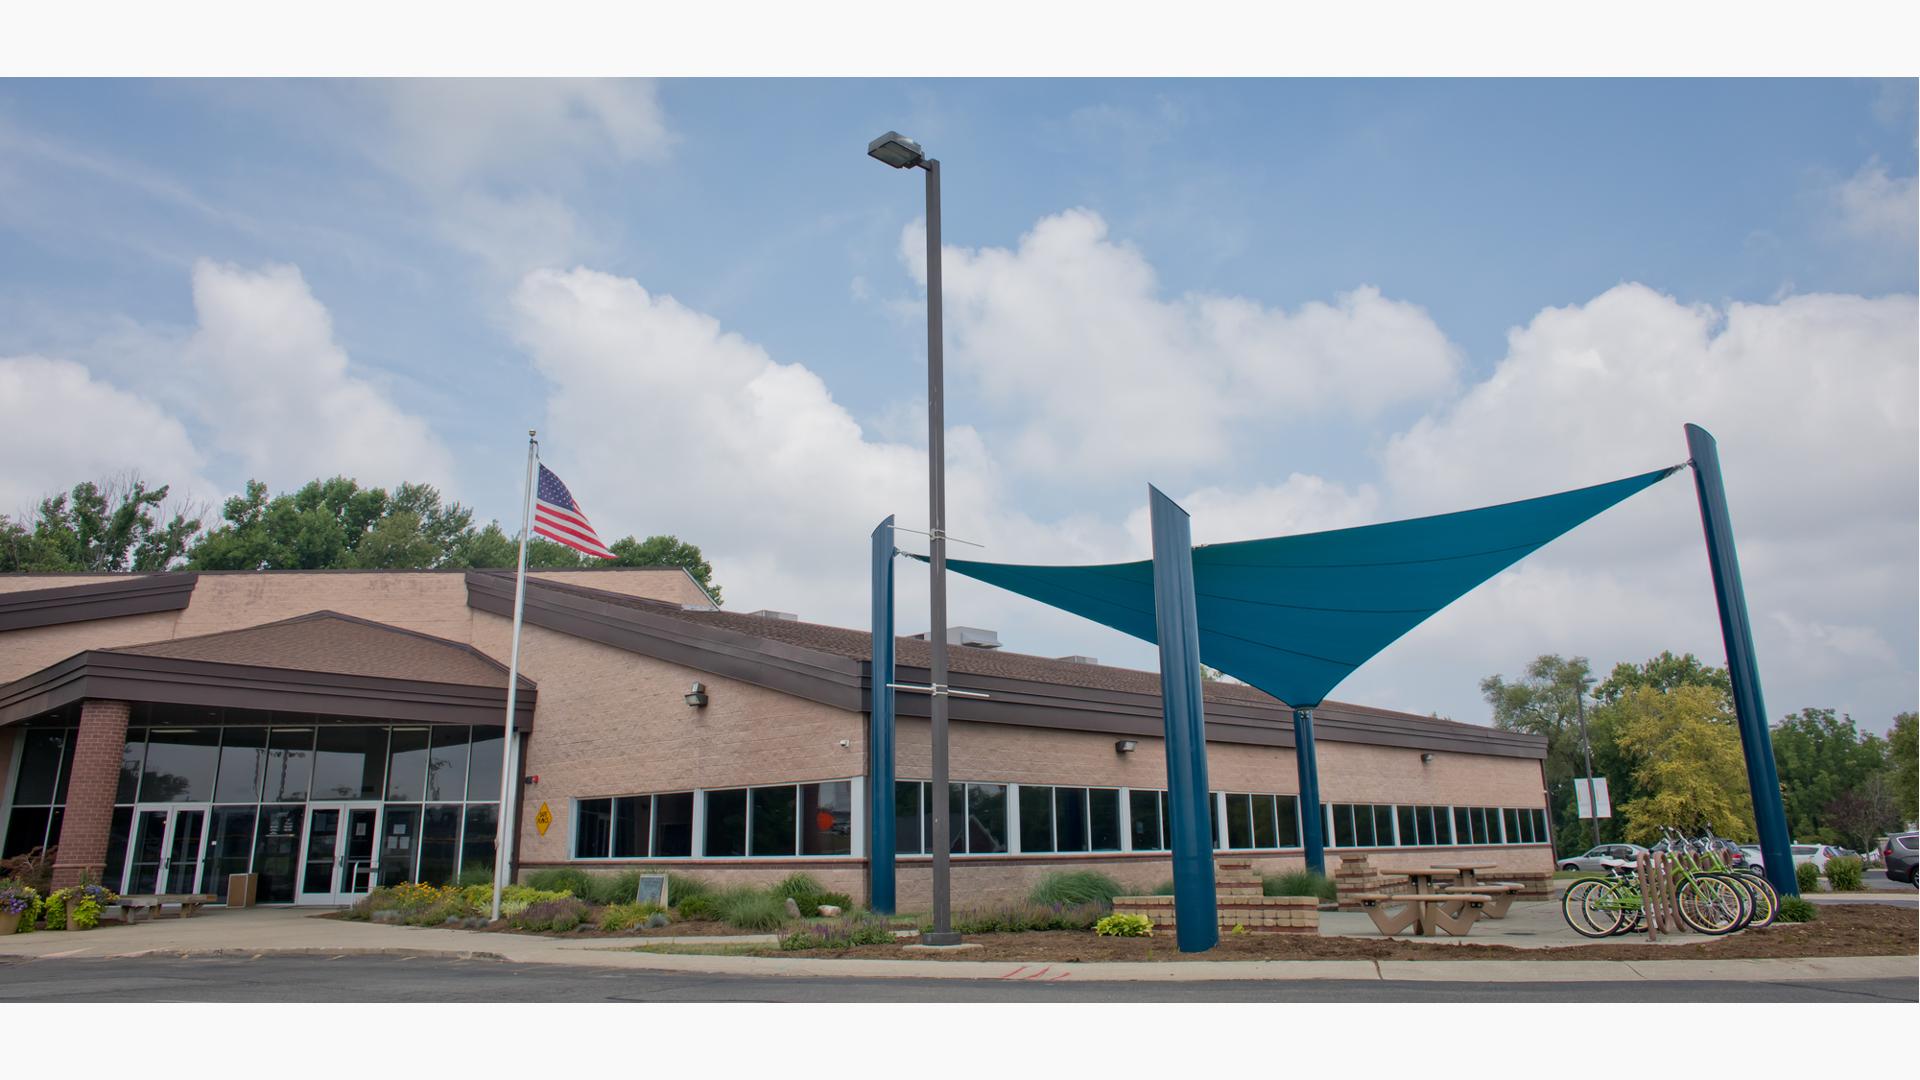 A custom SkyWays shade product installed for Greenwood Community Center designed to block up to 97 percent of the sun's UV rays.